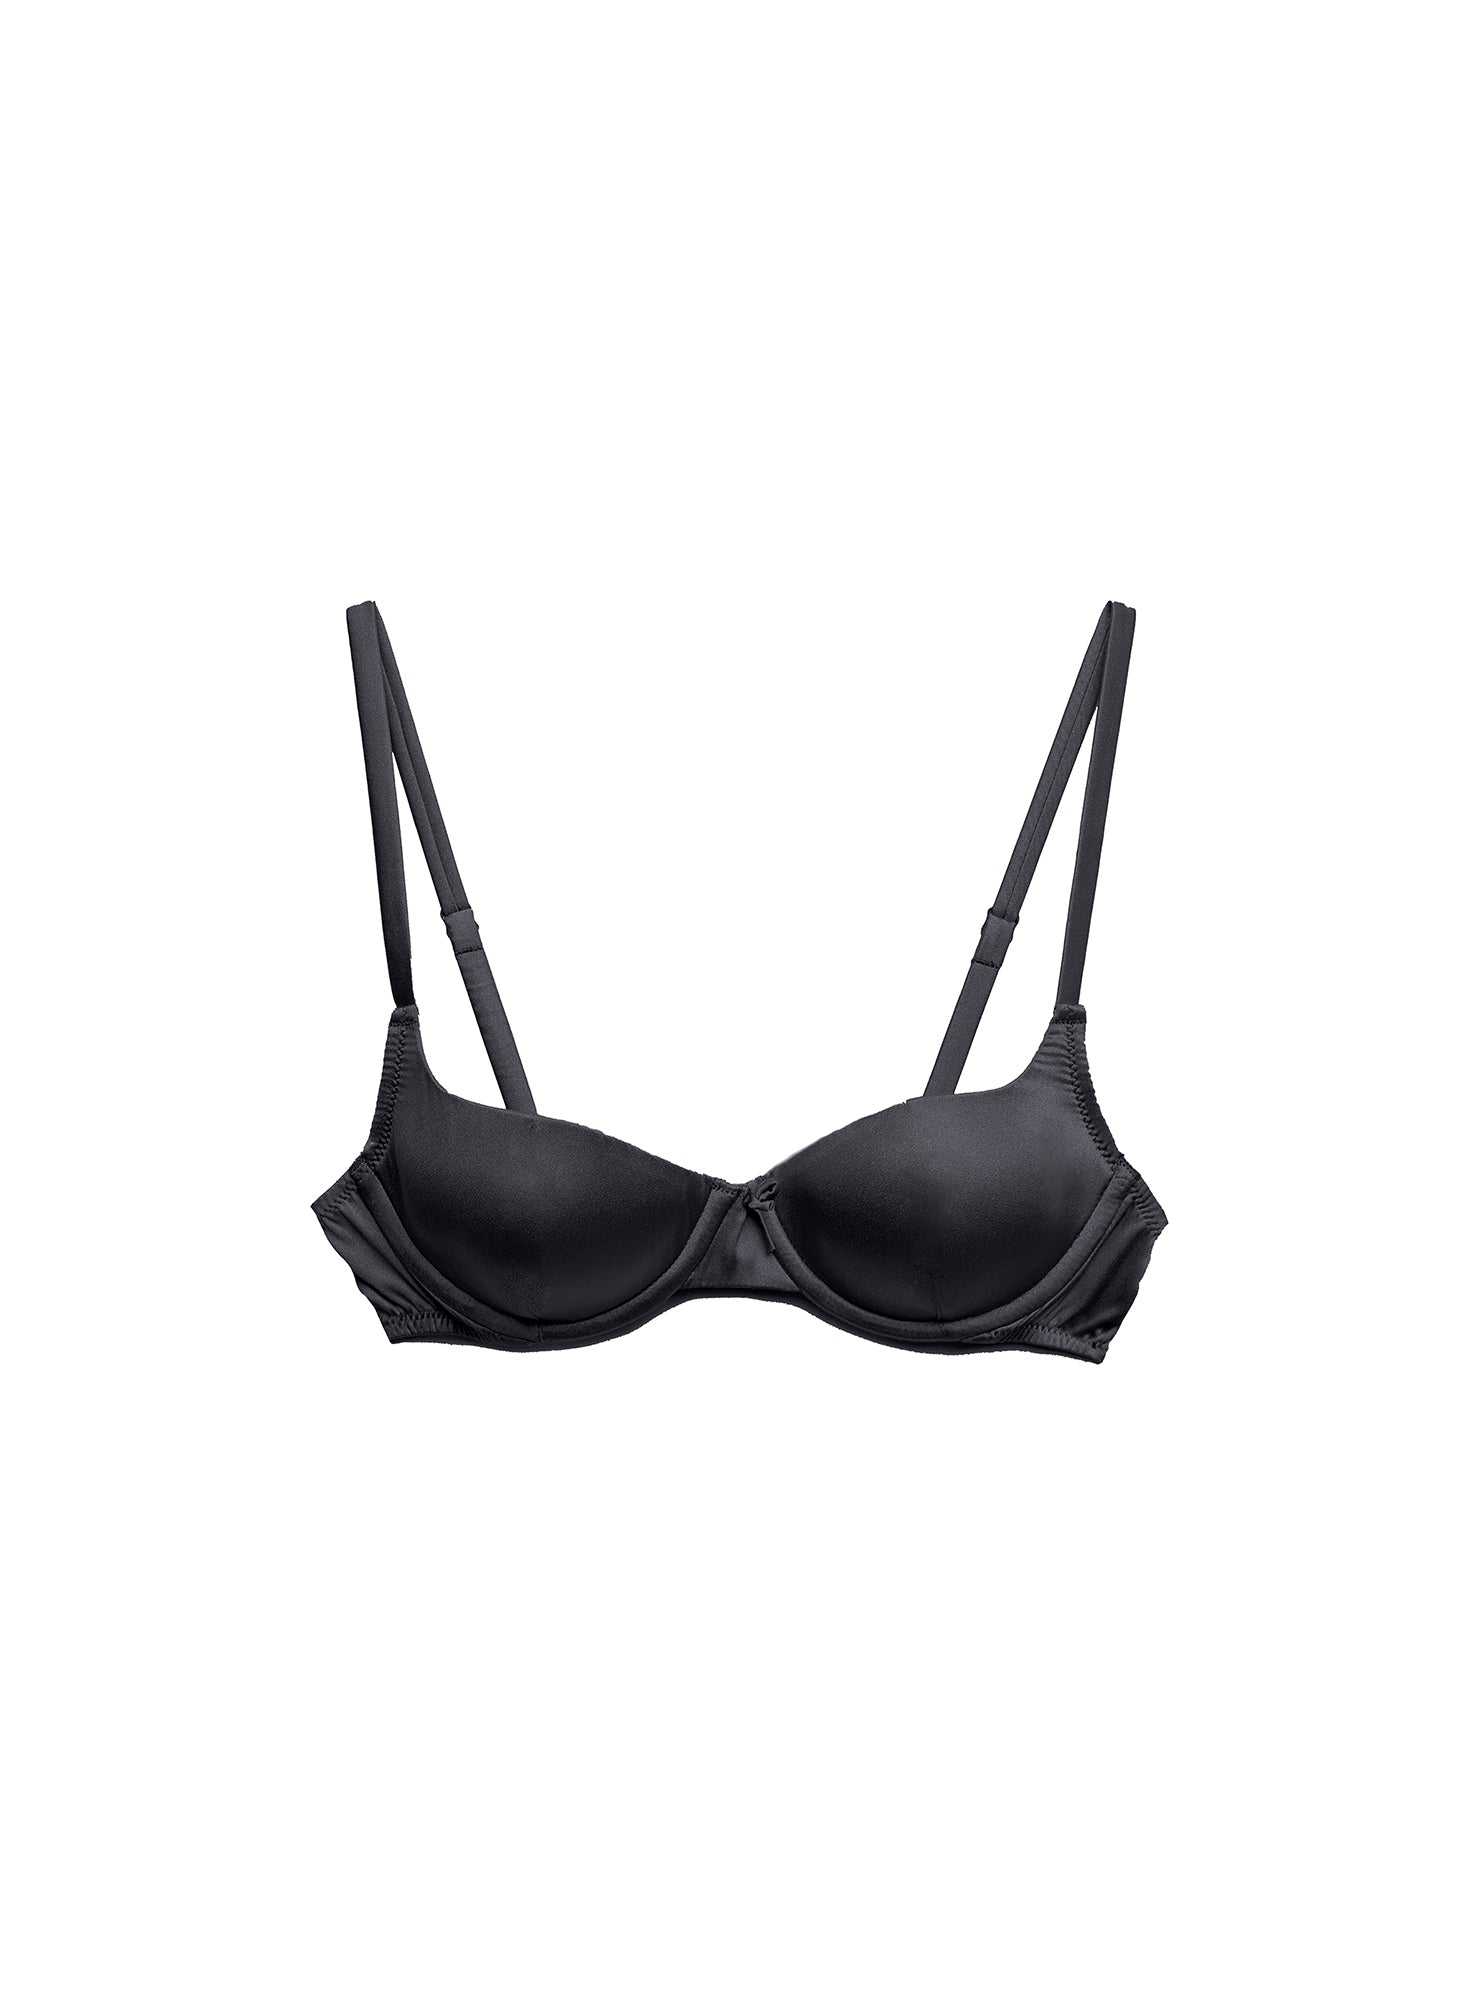 YWDJ Bras for Women Push Up for Small Breast for Sagging Breasts